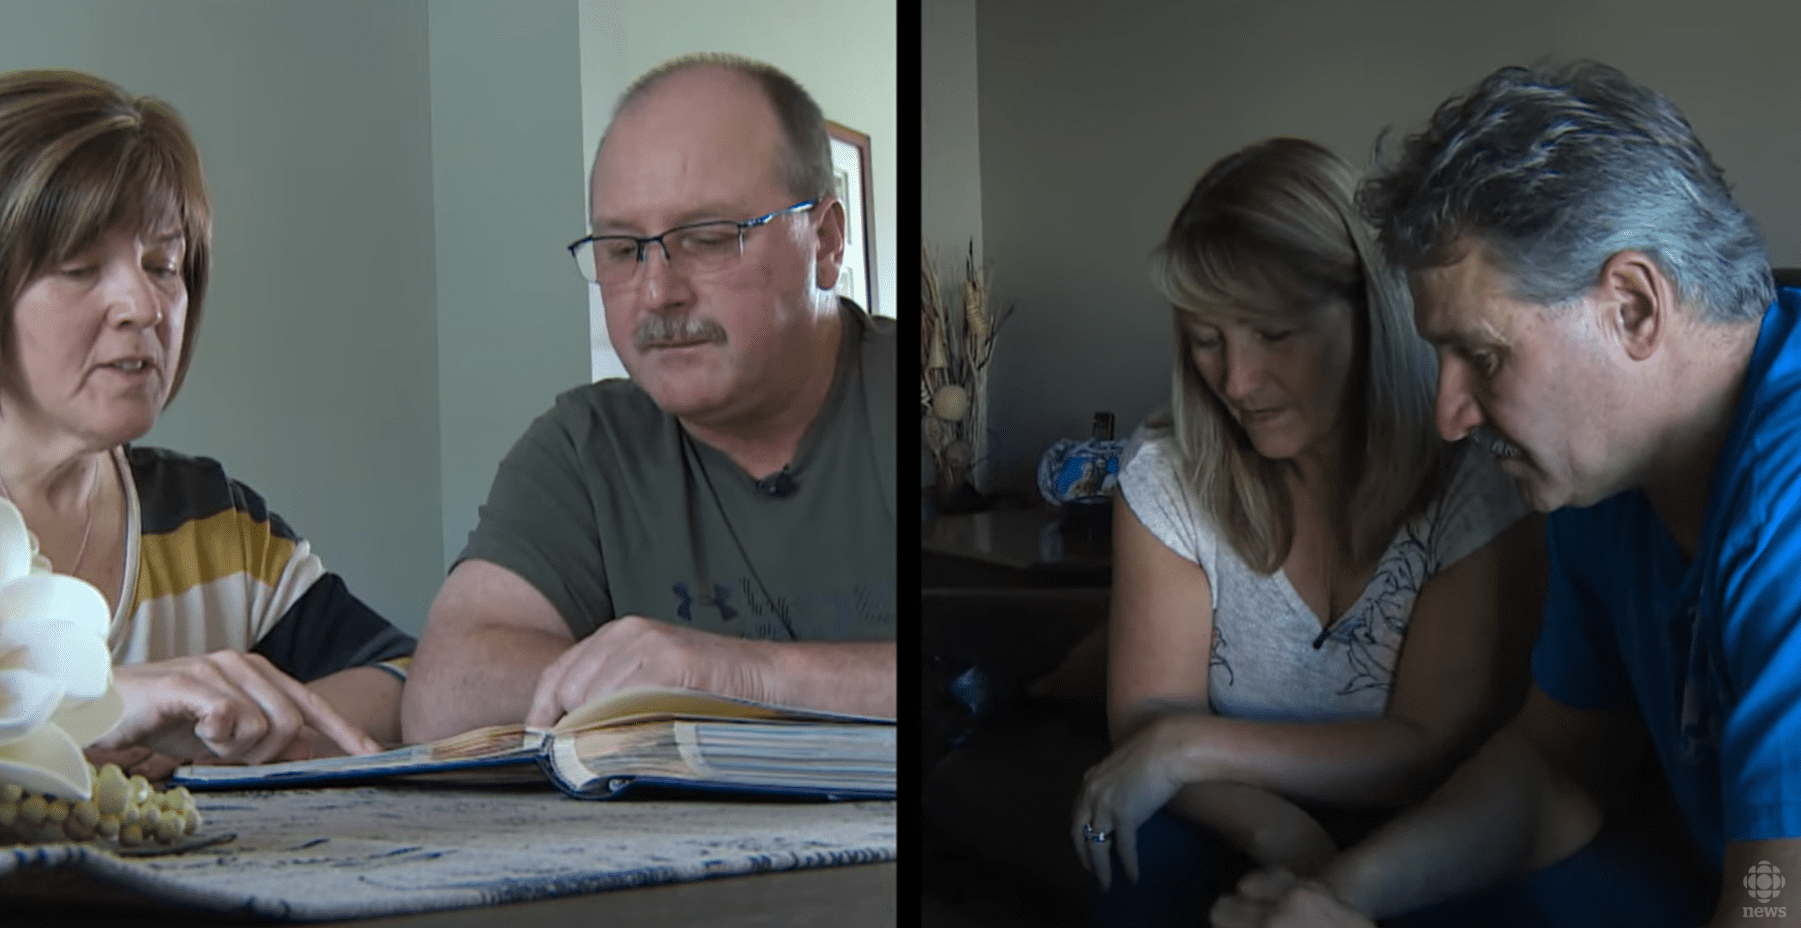 [Left] Craig Avery with his wife; [Right] Clarence Hynes with his wife. | Source: youtube.com/CBC News: The National